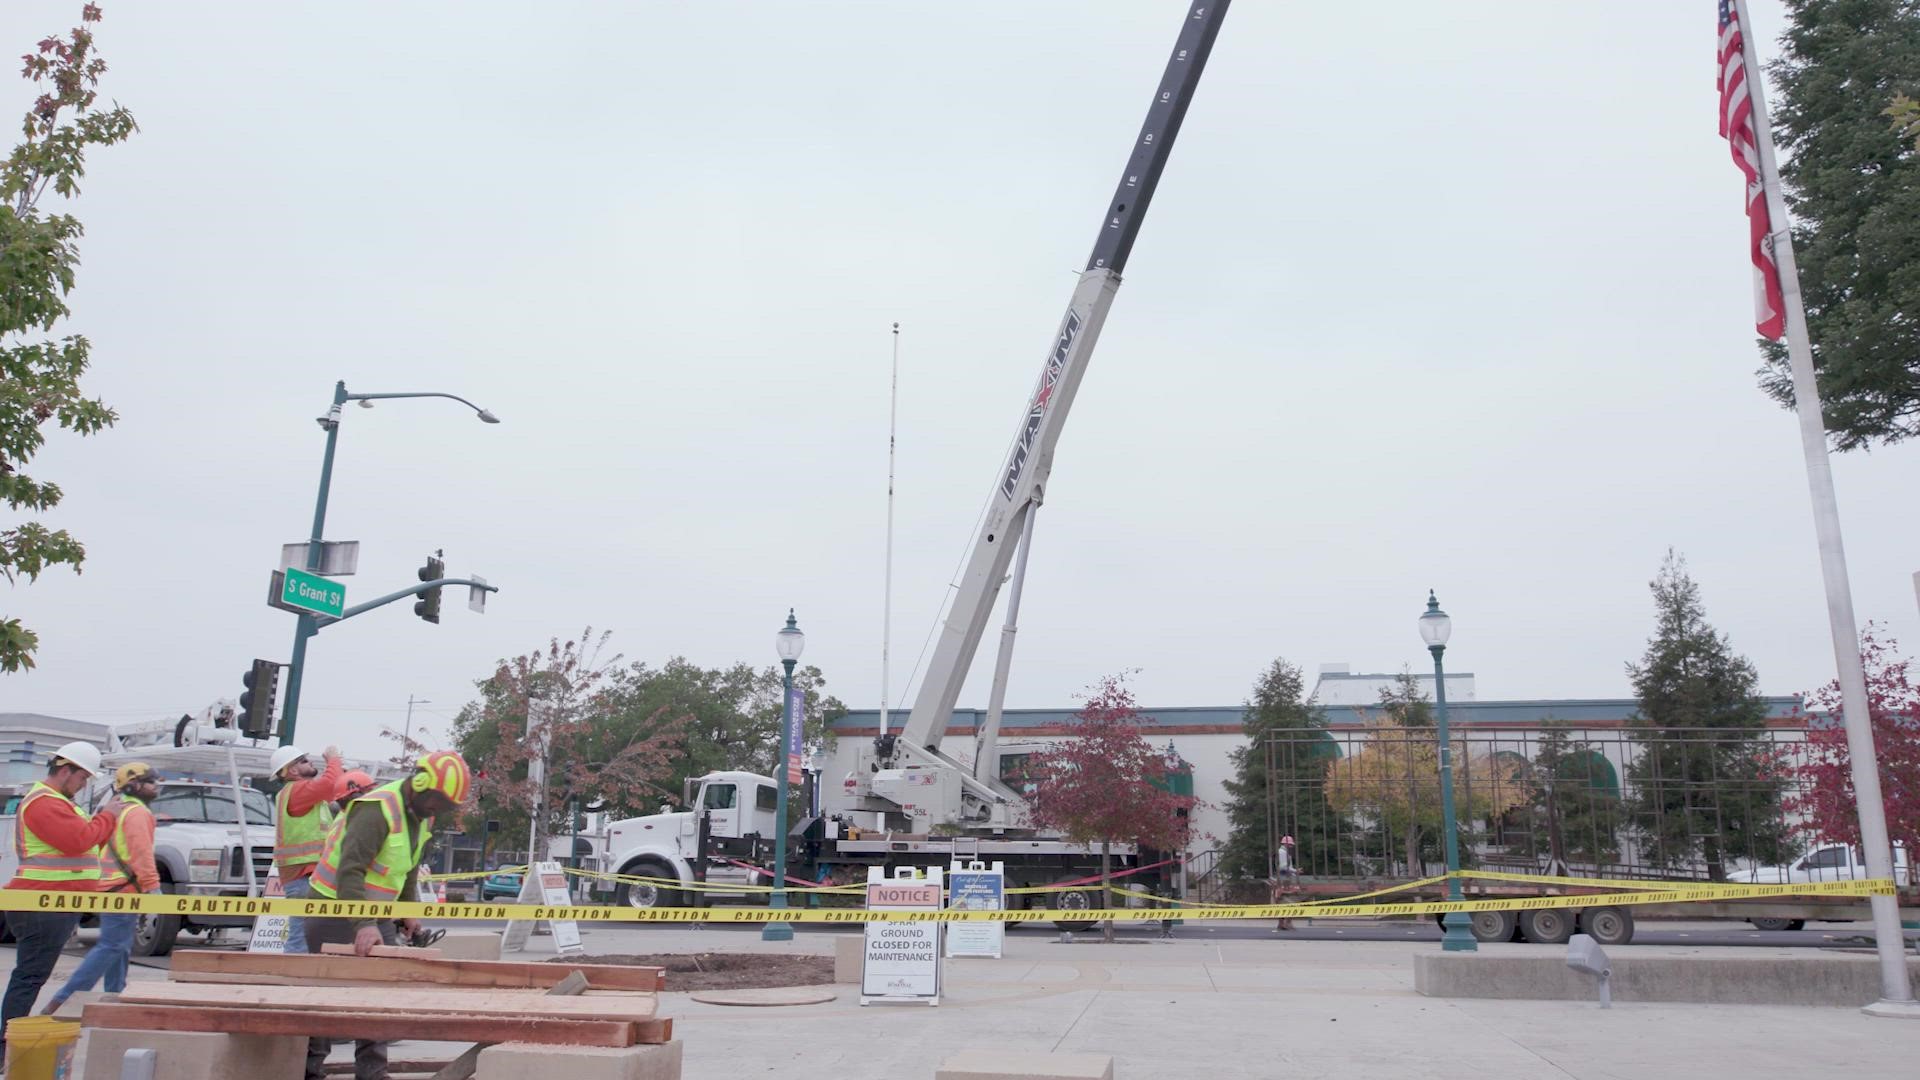 Watch as the city of Roseville installs its Christmas tree in the town square on Vernon Street.